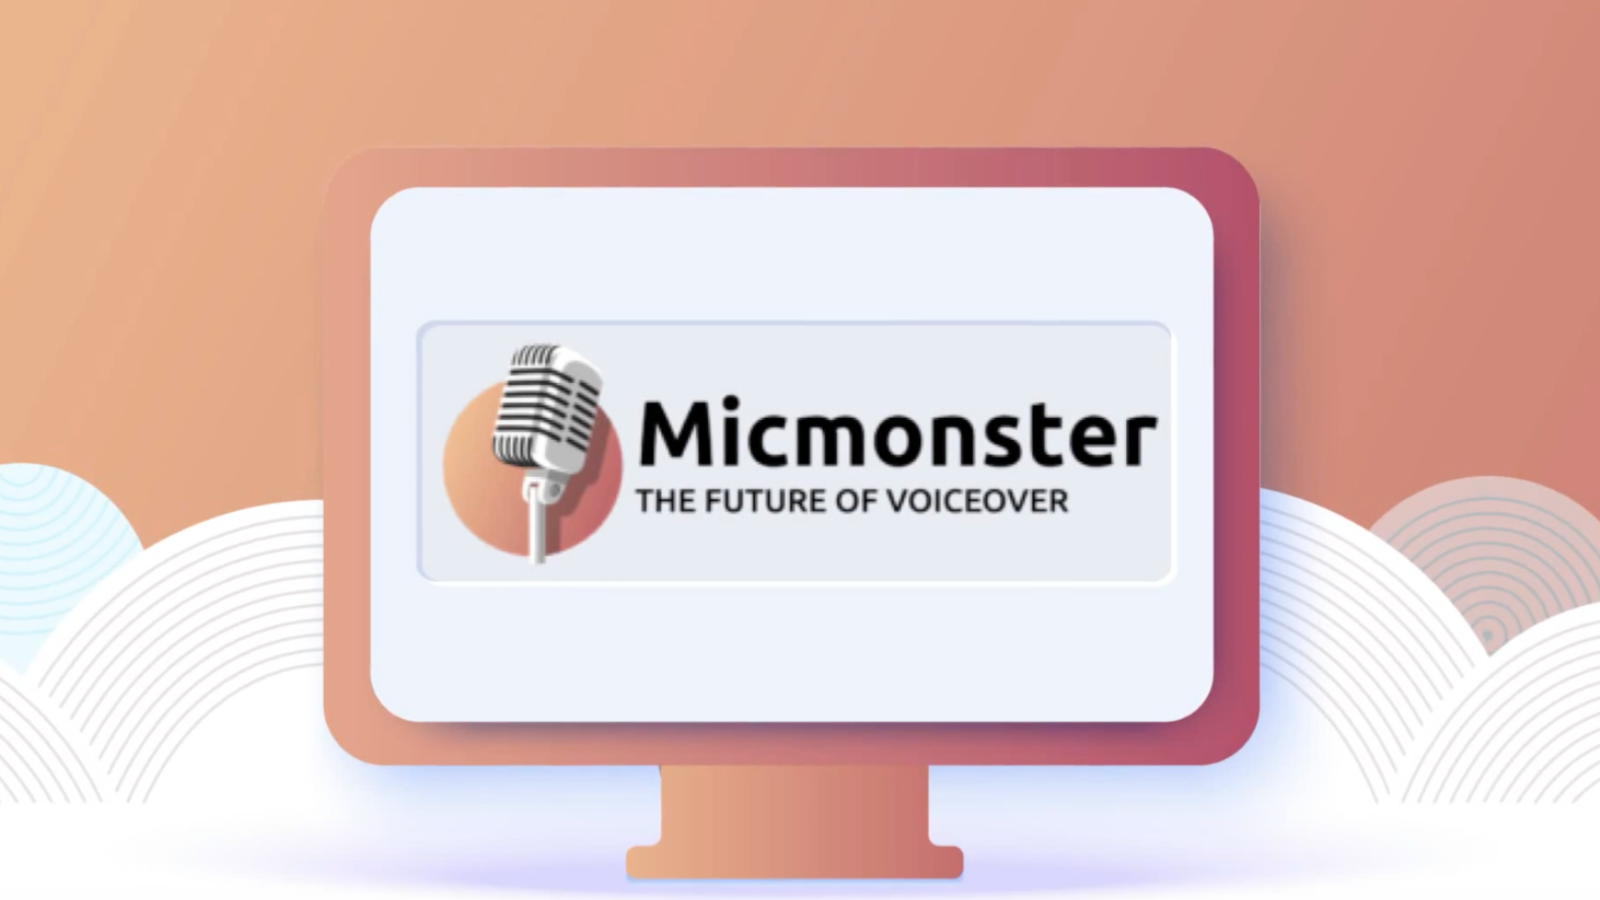 micmonster logo on illustrated screen with clouds in background